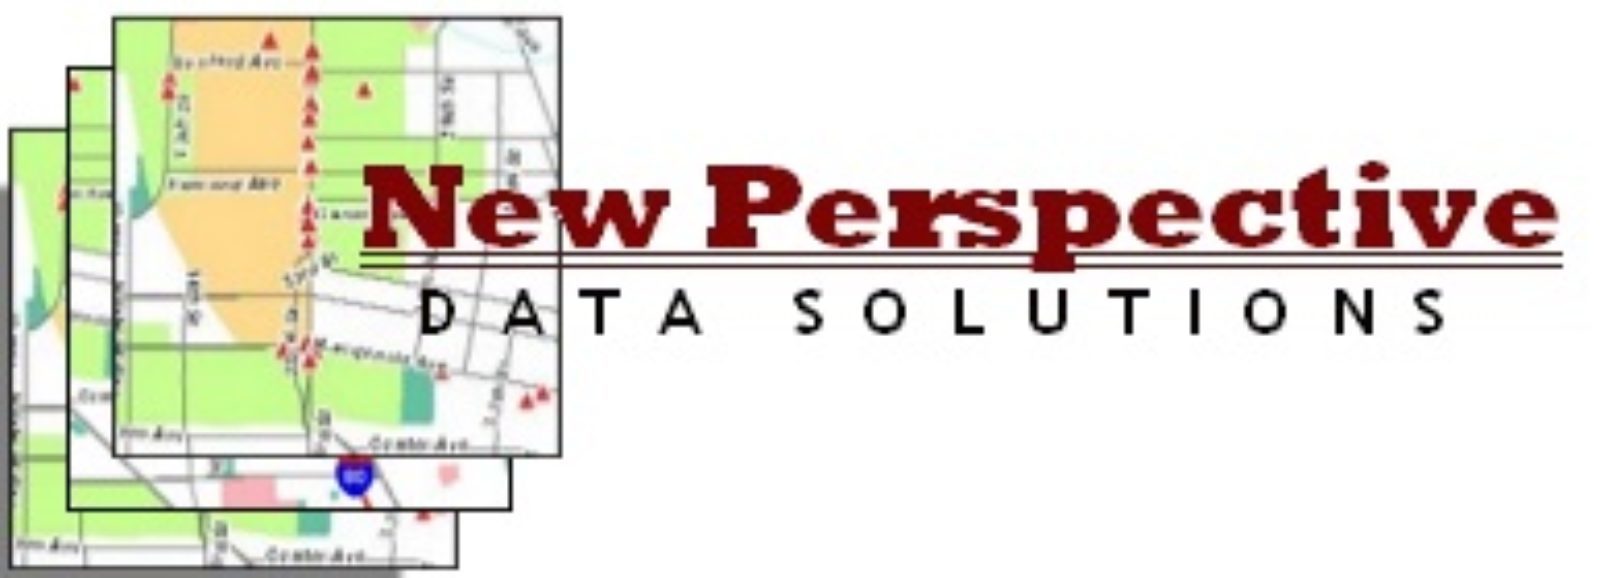 New Perspective Data Solutions